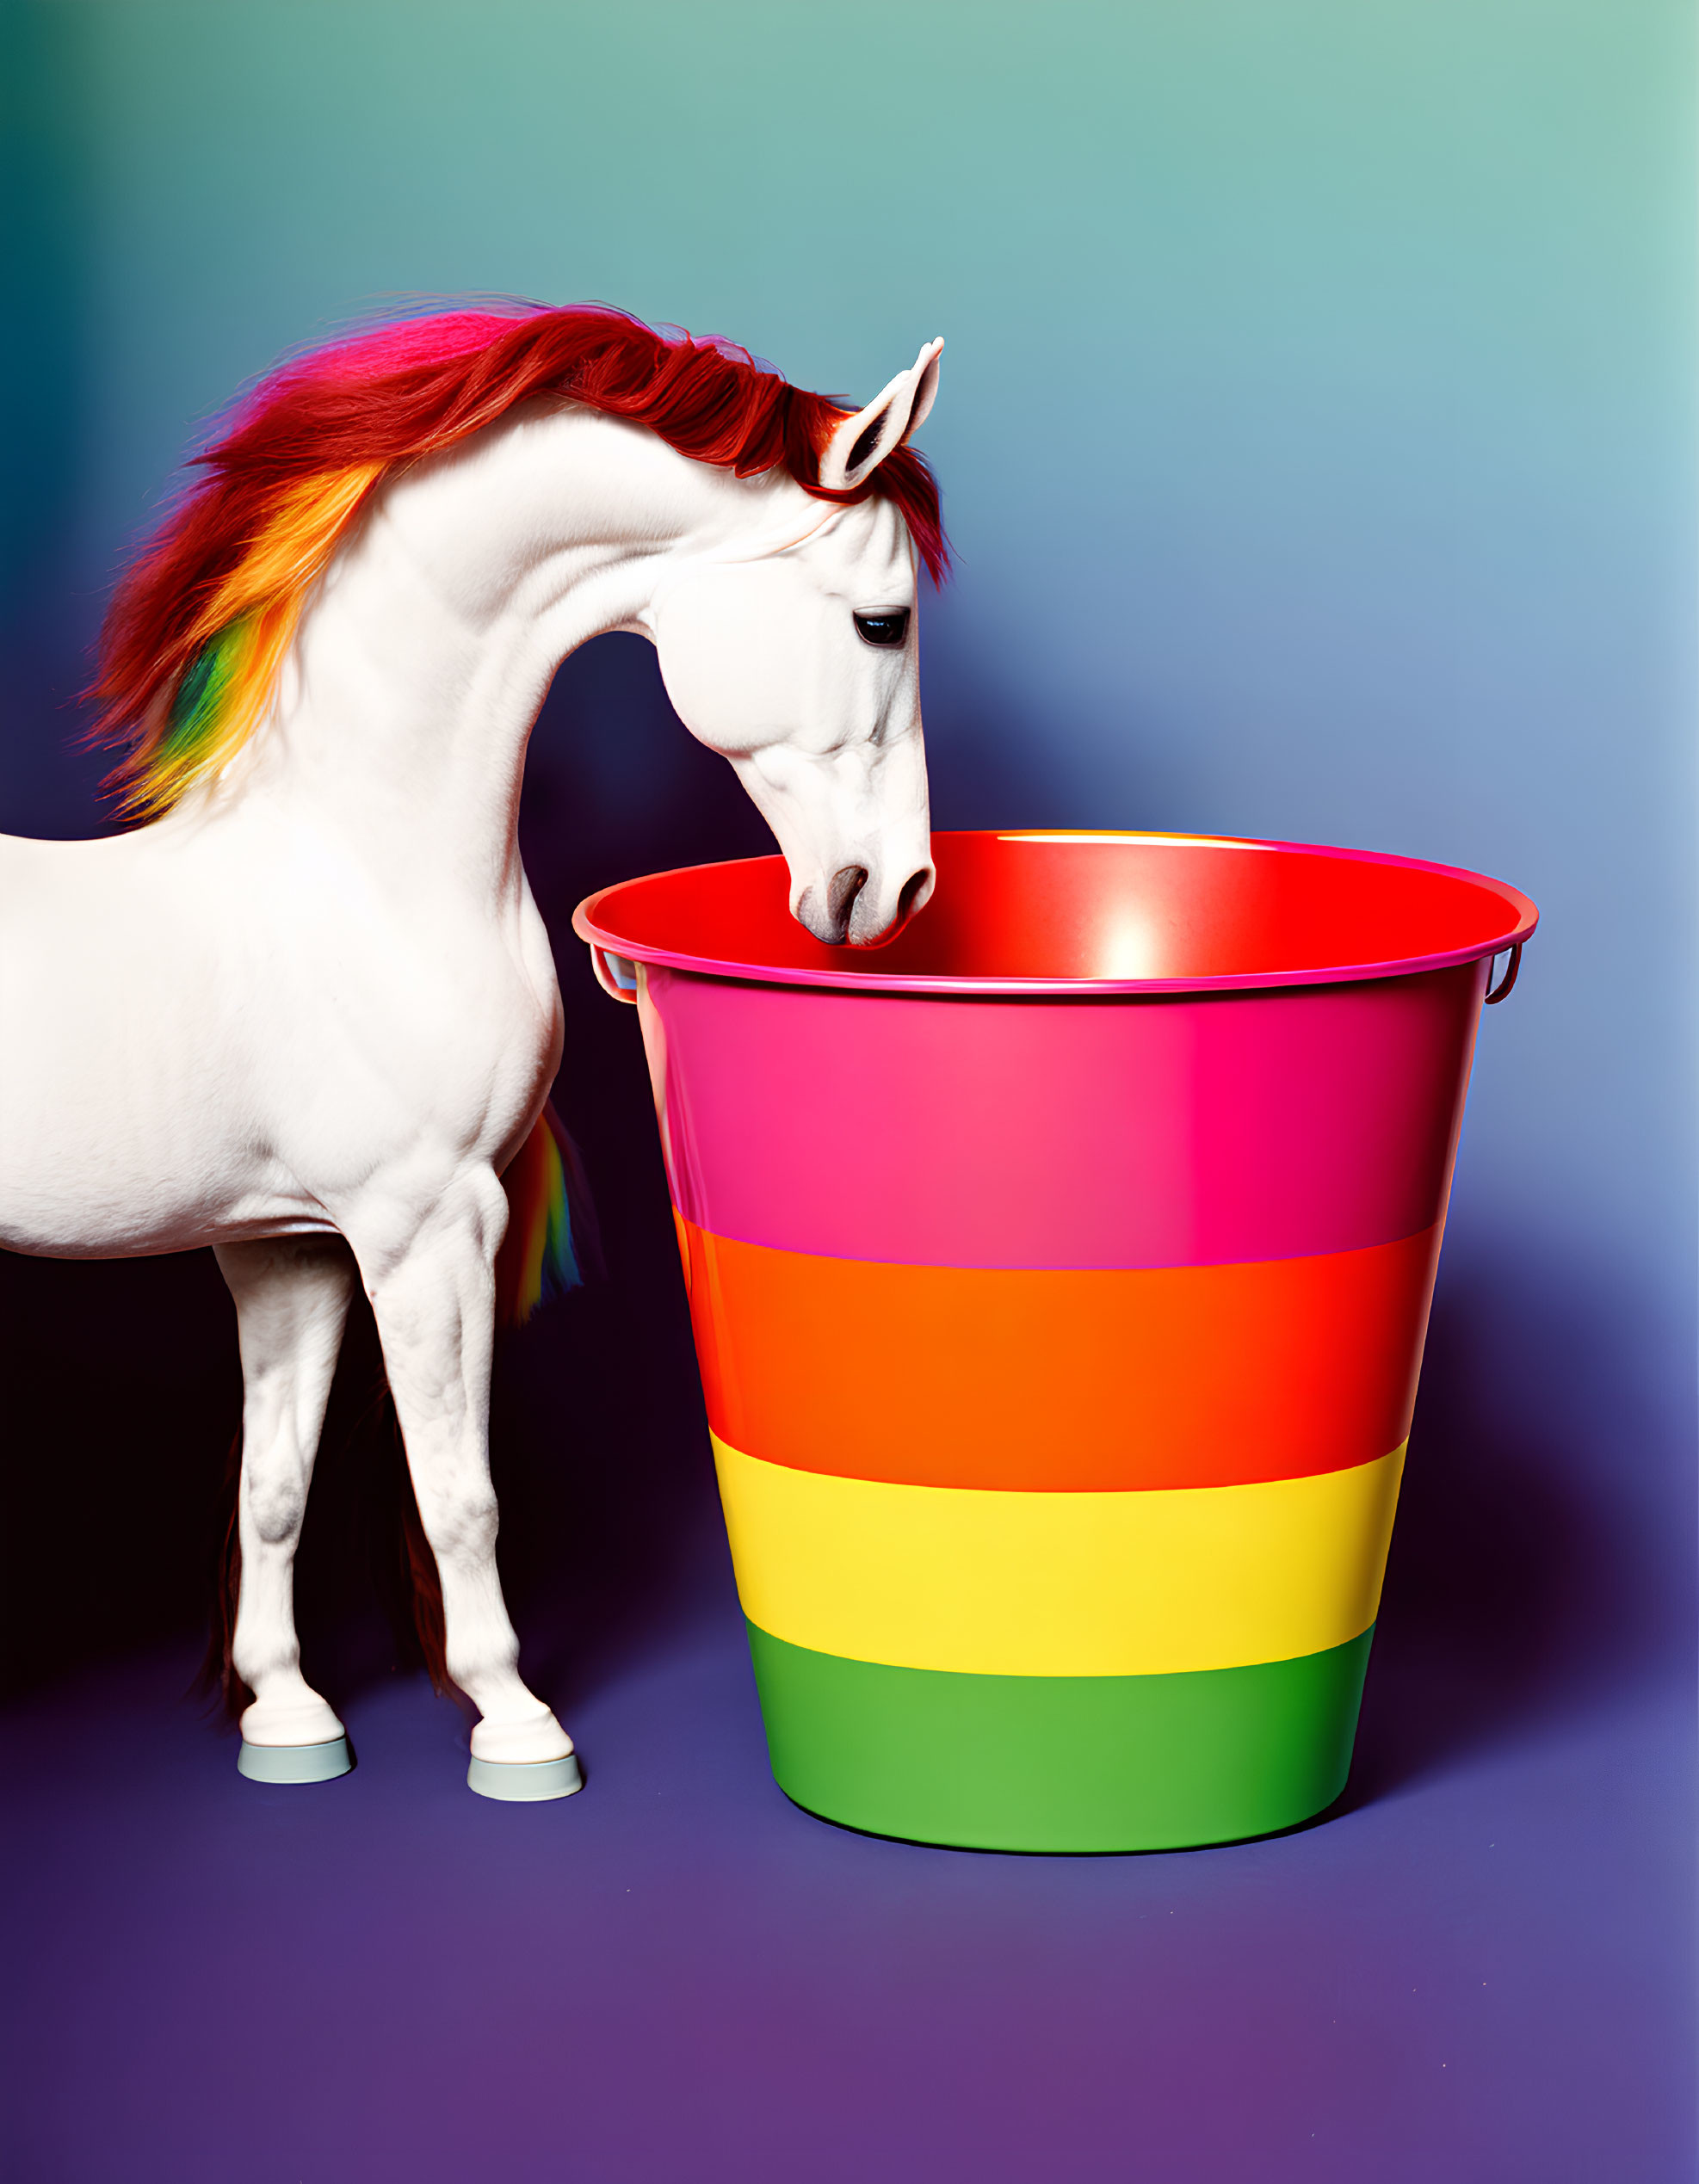 White Horse with Rainbow Mane and Colorful Striped Bucket on Blue Background